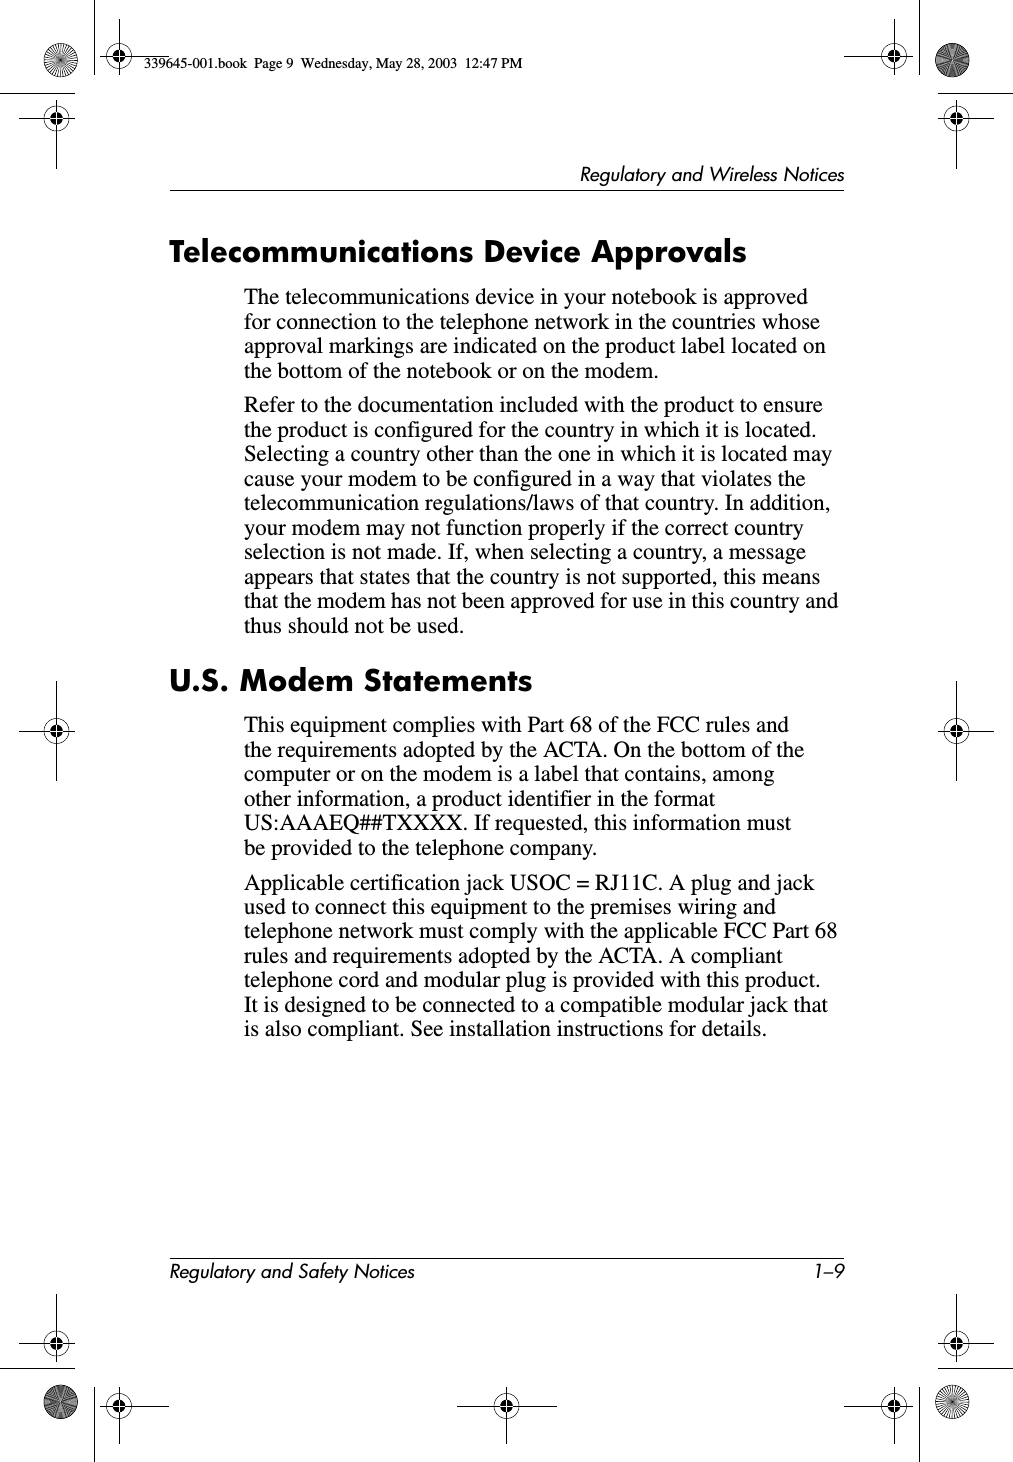 Regulatory and Wireless NoticesRegulatory and Safety Notices 1–9Telecommunications Device ApprovalsThe telecommunications device in your notebook is approved for connection to the telephone network in the countries whose approval markings are indicated on the product label located on the bottom of the notebook or on the modem.Refer to the documentation included with the product to ensure the product is configured for the country in which it is located. Selecting a country other than the one in which it is located may cause your modem to be configured in a way that violates the telecommunication regulations/laws of that country. In addition, your modem may not function properly if the correct country selection is not made. If, when selecting a country, a message appears that states that the country is not supported, this means that the modem has not been approved for use in this country and thus should not be used.U.S. Modem StatementsThis equipment complies with Part 68 of the FCC rules and the requirements adopted by the ACTA. On the bottom of the computer or on the modem is a label that contains, among other information, a product identifier in the format US:AAAEQ##TXXXX. If requested, this information must be provided to the telephone company.Applicable certification jack USOC = RJ11C. A plug and jack used to connect this equipment to the premises wiring and telephone network must comply with the applicable FCC Part 68 rules and requirements adopted by the ACTA. A compliant telephone cord and modular plug is provided with this product. It is designed to be connected to a compatible modular jack that is also compliant. See installation instructions for details.339645-001.book  Page 9  Wednesday, May 28, 2003  12:47 PM